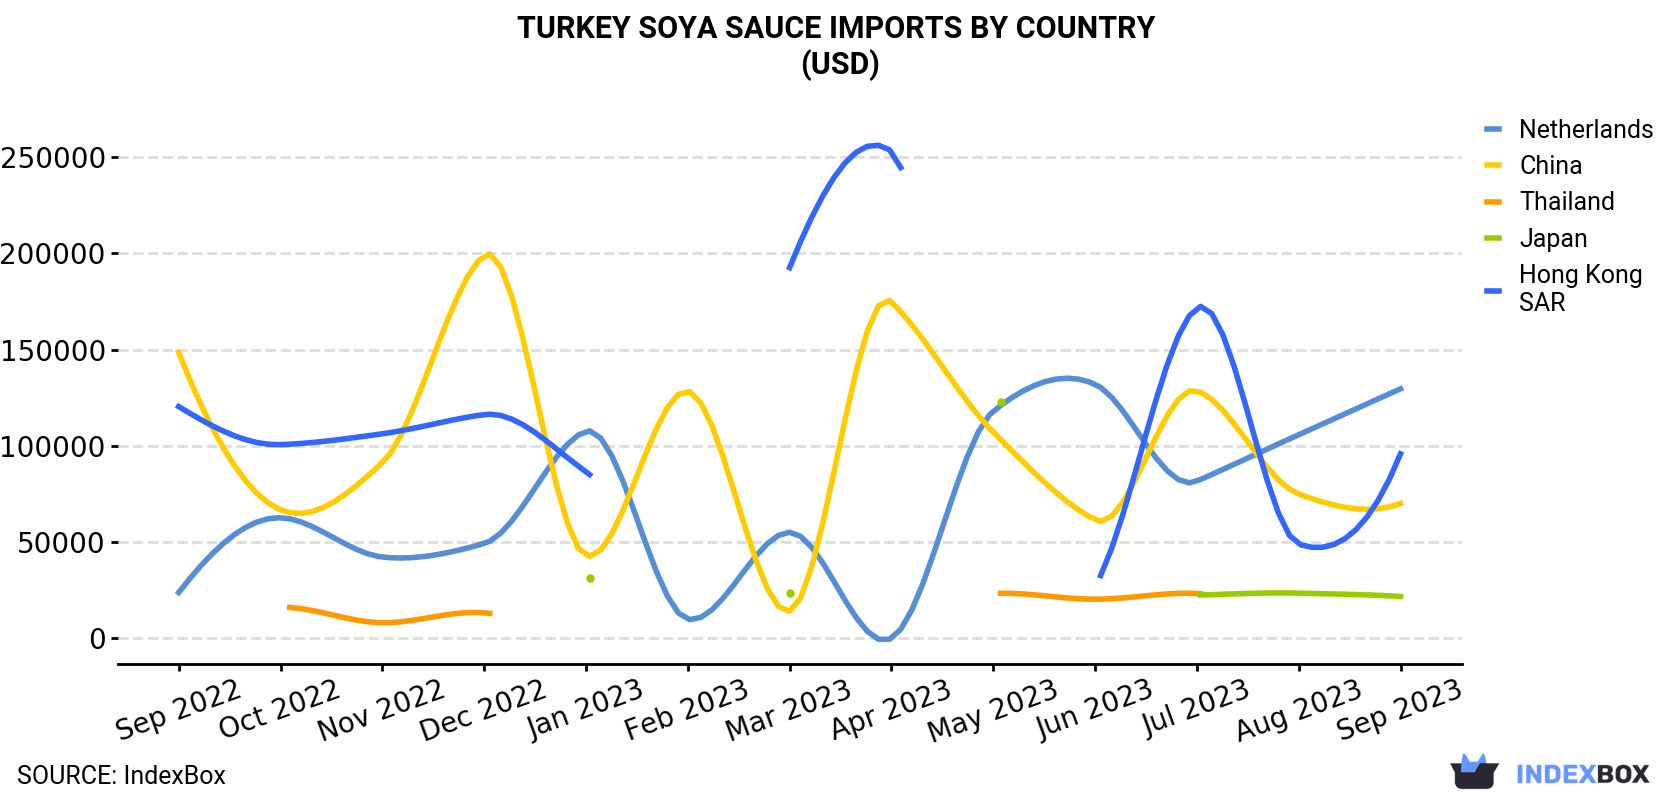 Turkey Soya Sauce Imports By Country (USD)